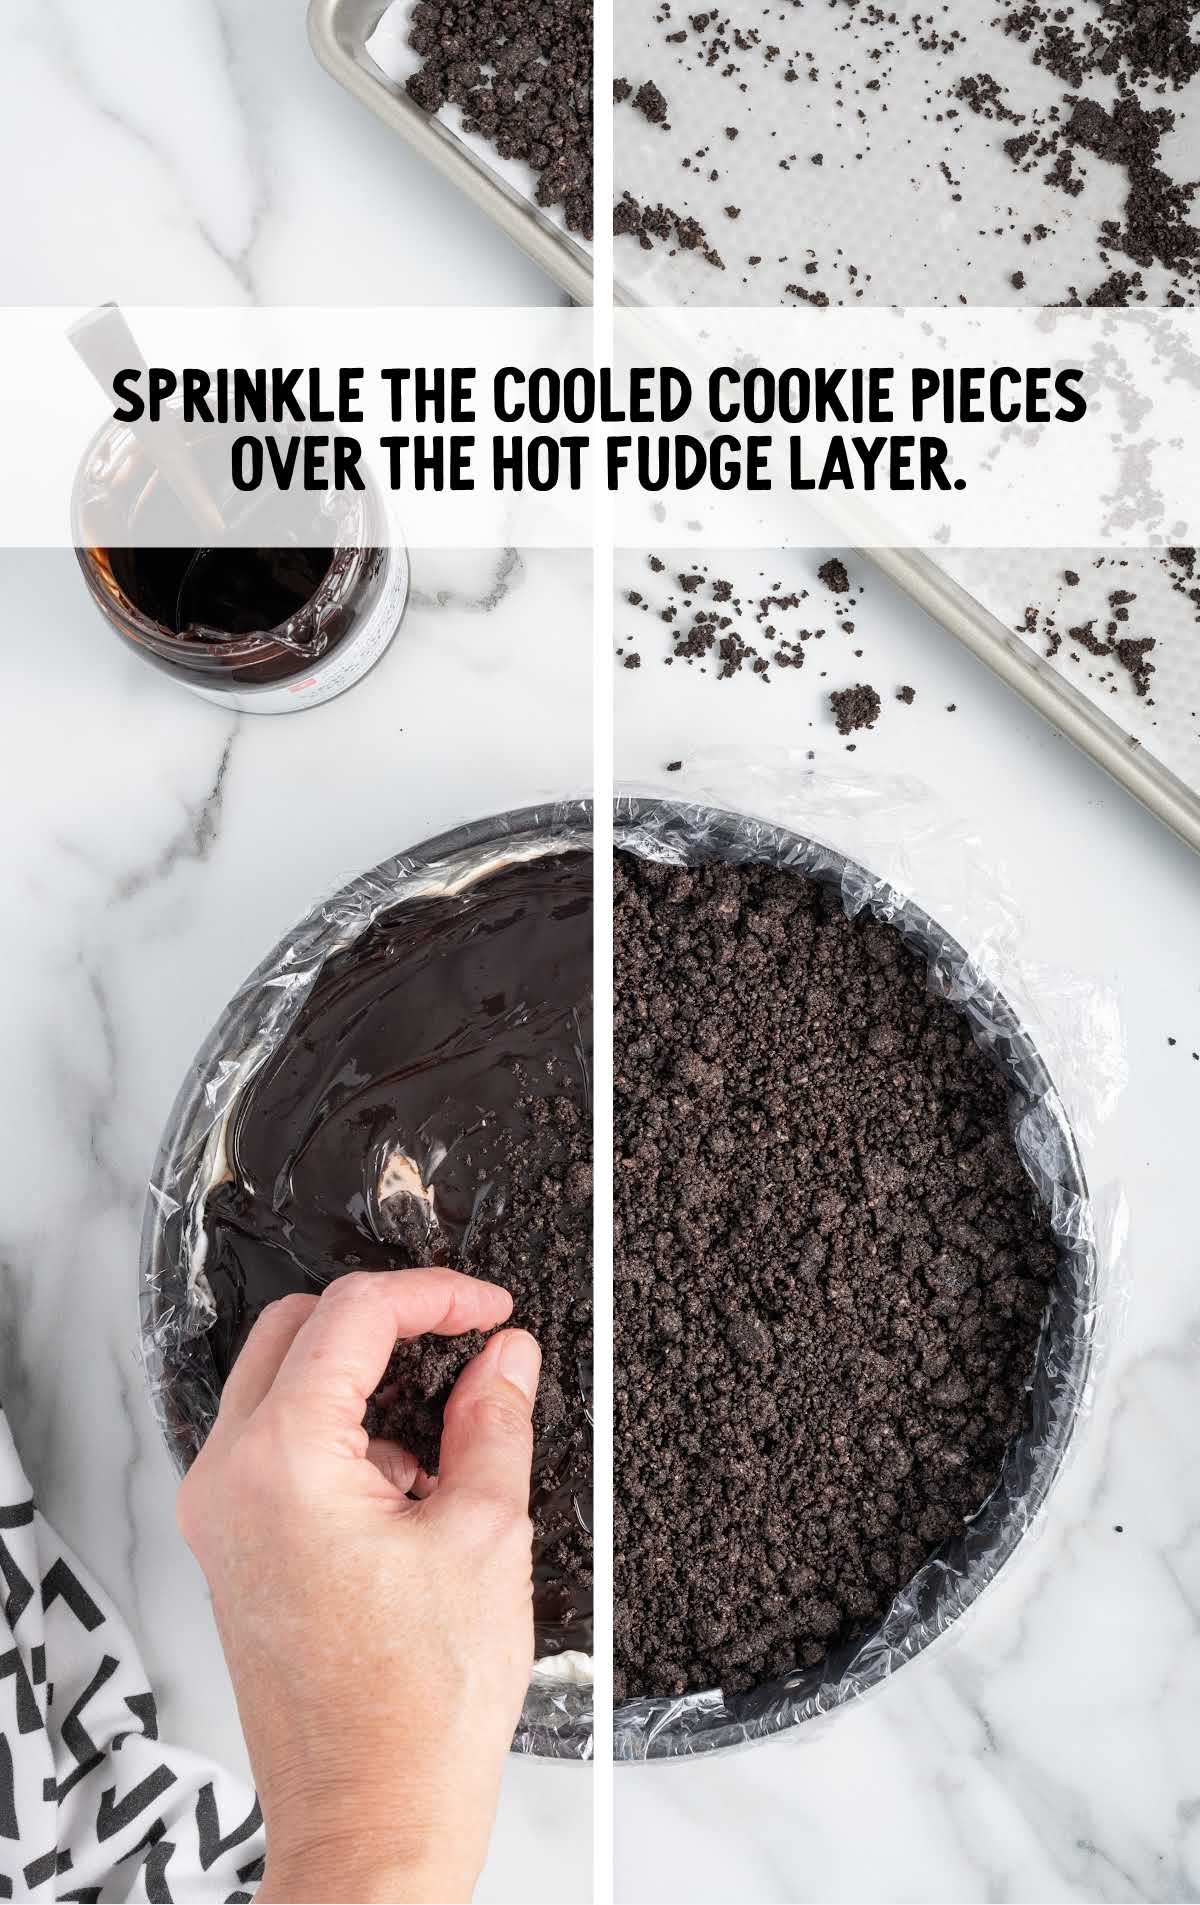 cooled cookies pieces sprinkled over the hot fudge layer